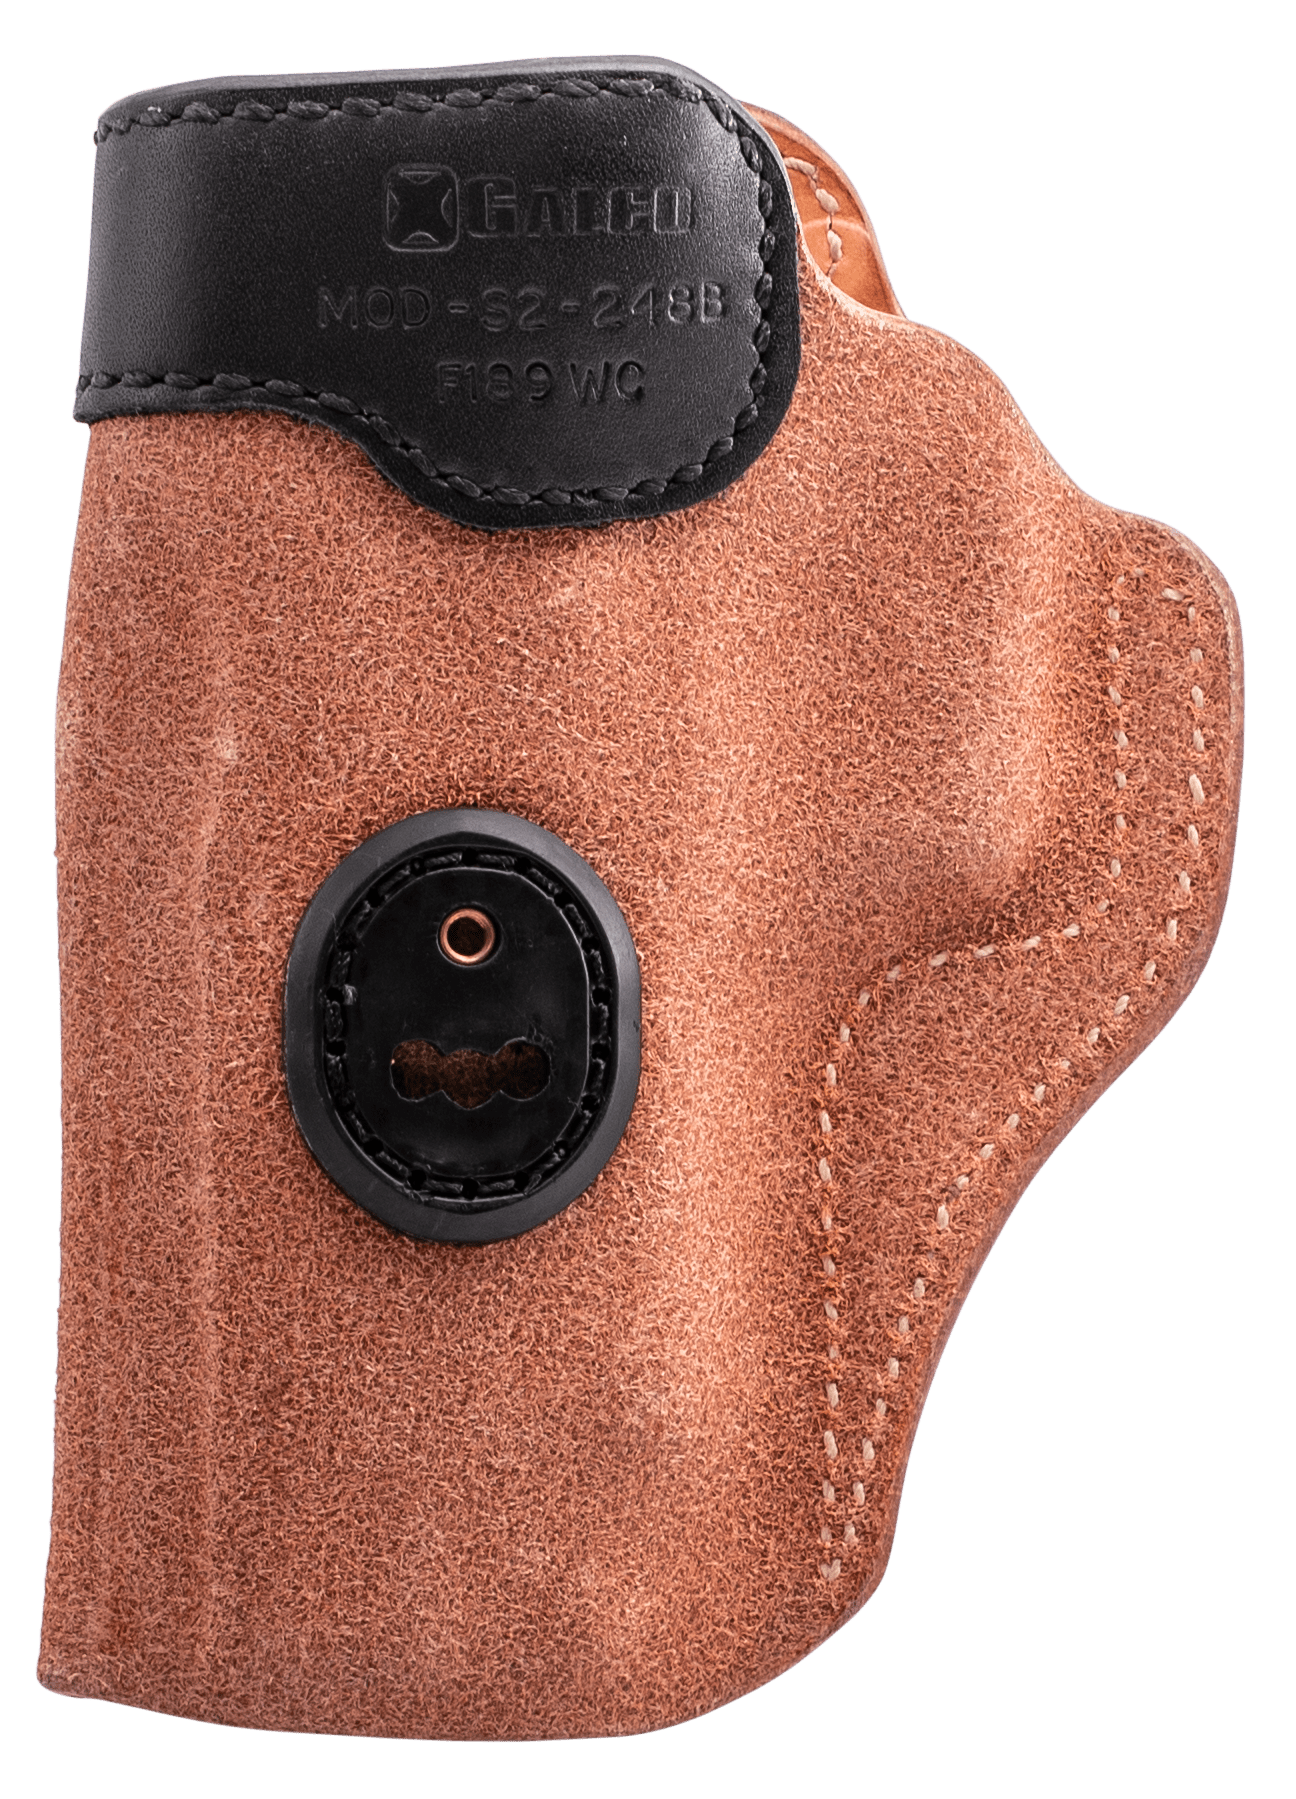 Galco Galco Scout 3.0, Galco S2248b   Scout 3.0 Iwb Blk Firearm Accessories